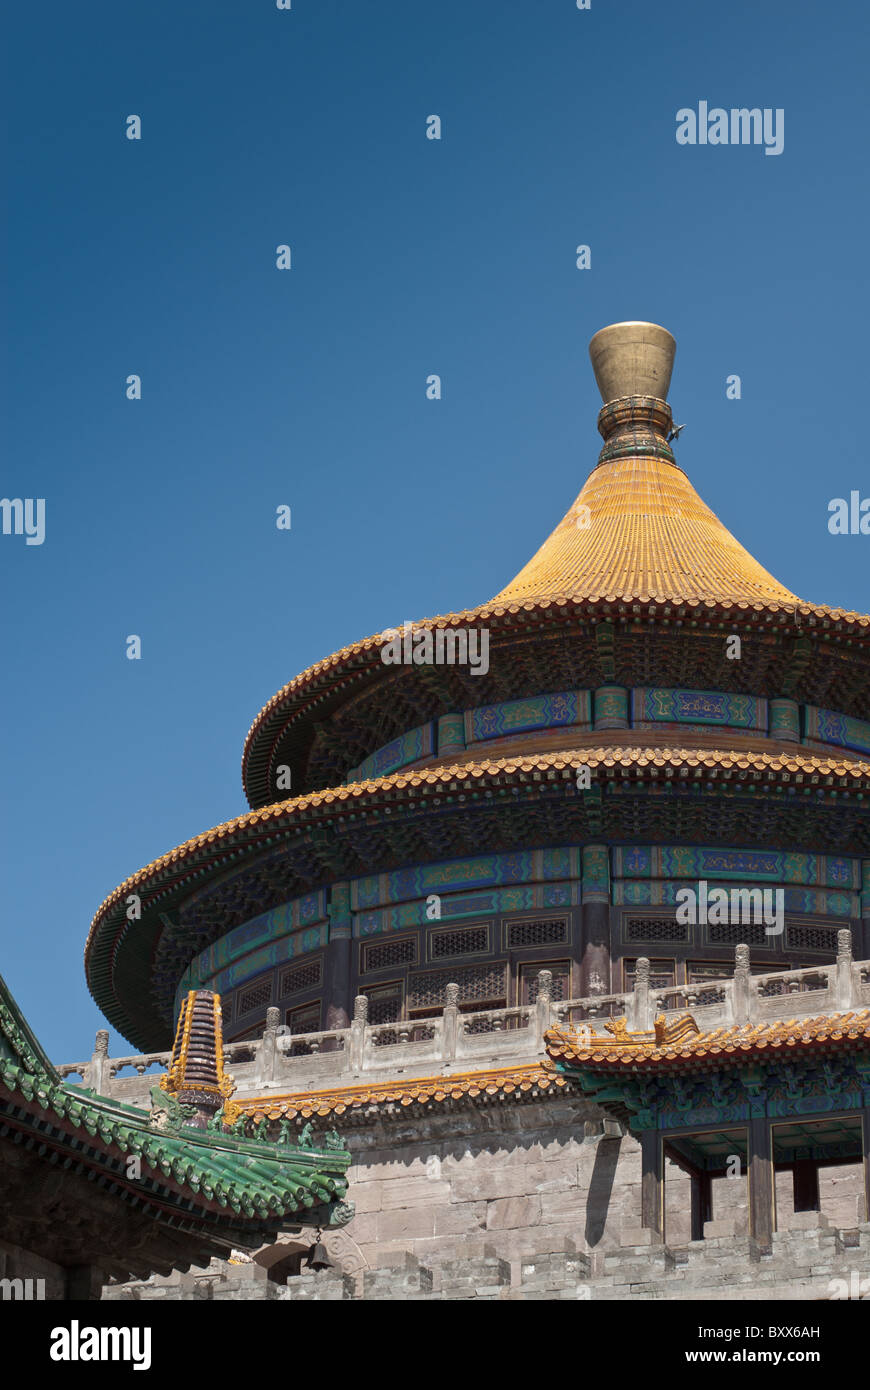 A round pavilion with golden tiles roof in a tibetan buddhist temple Stock Photo